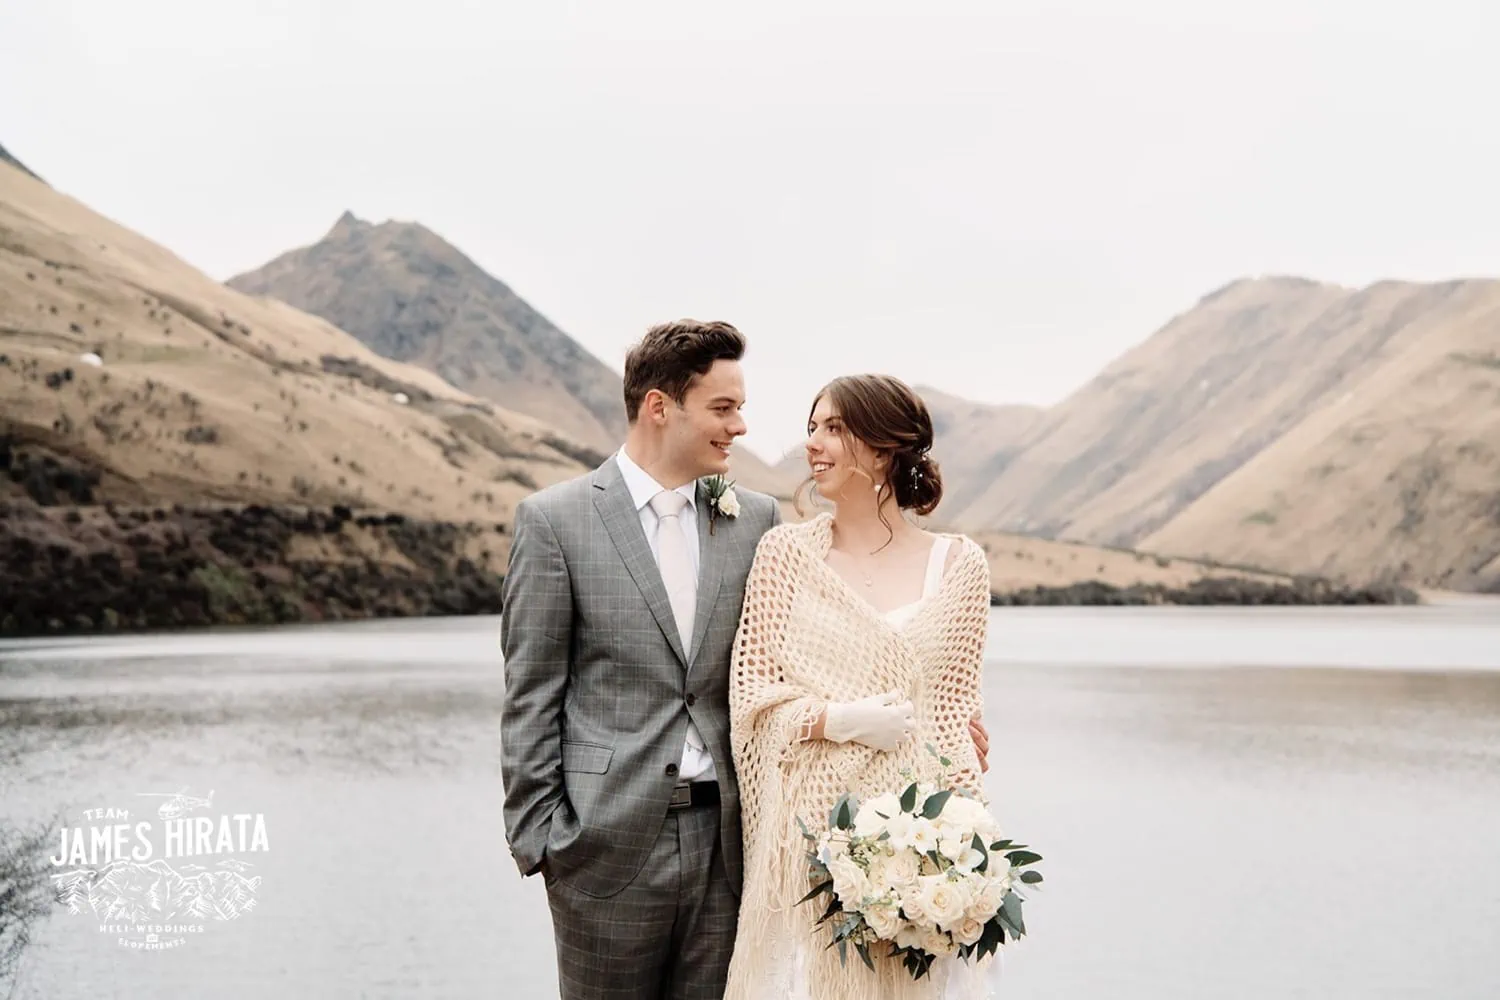 Regan & Jake exchange vows at their Queenstown elopement wedding, with a stunning lake backdrop in New Zealand.